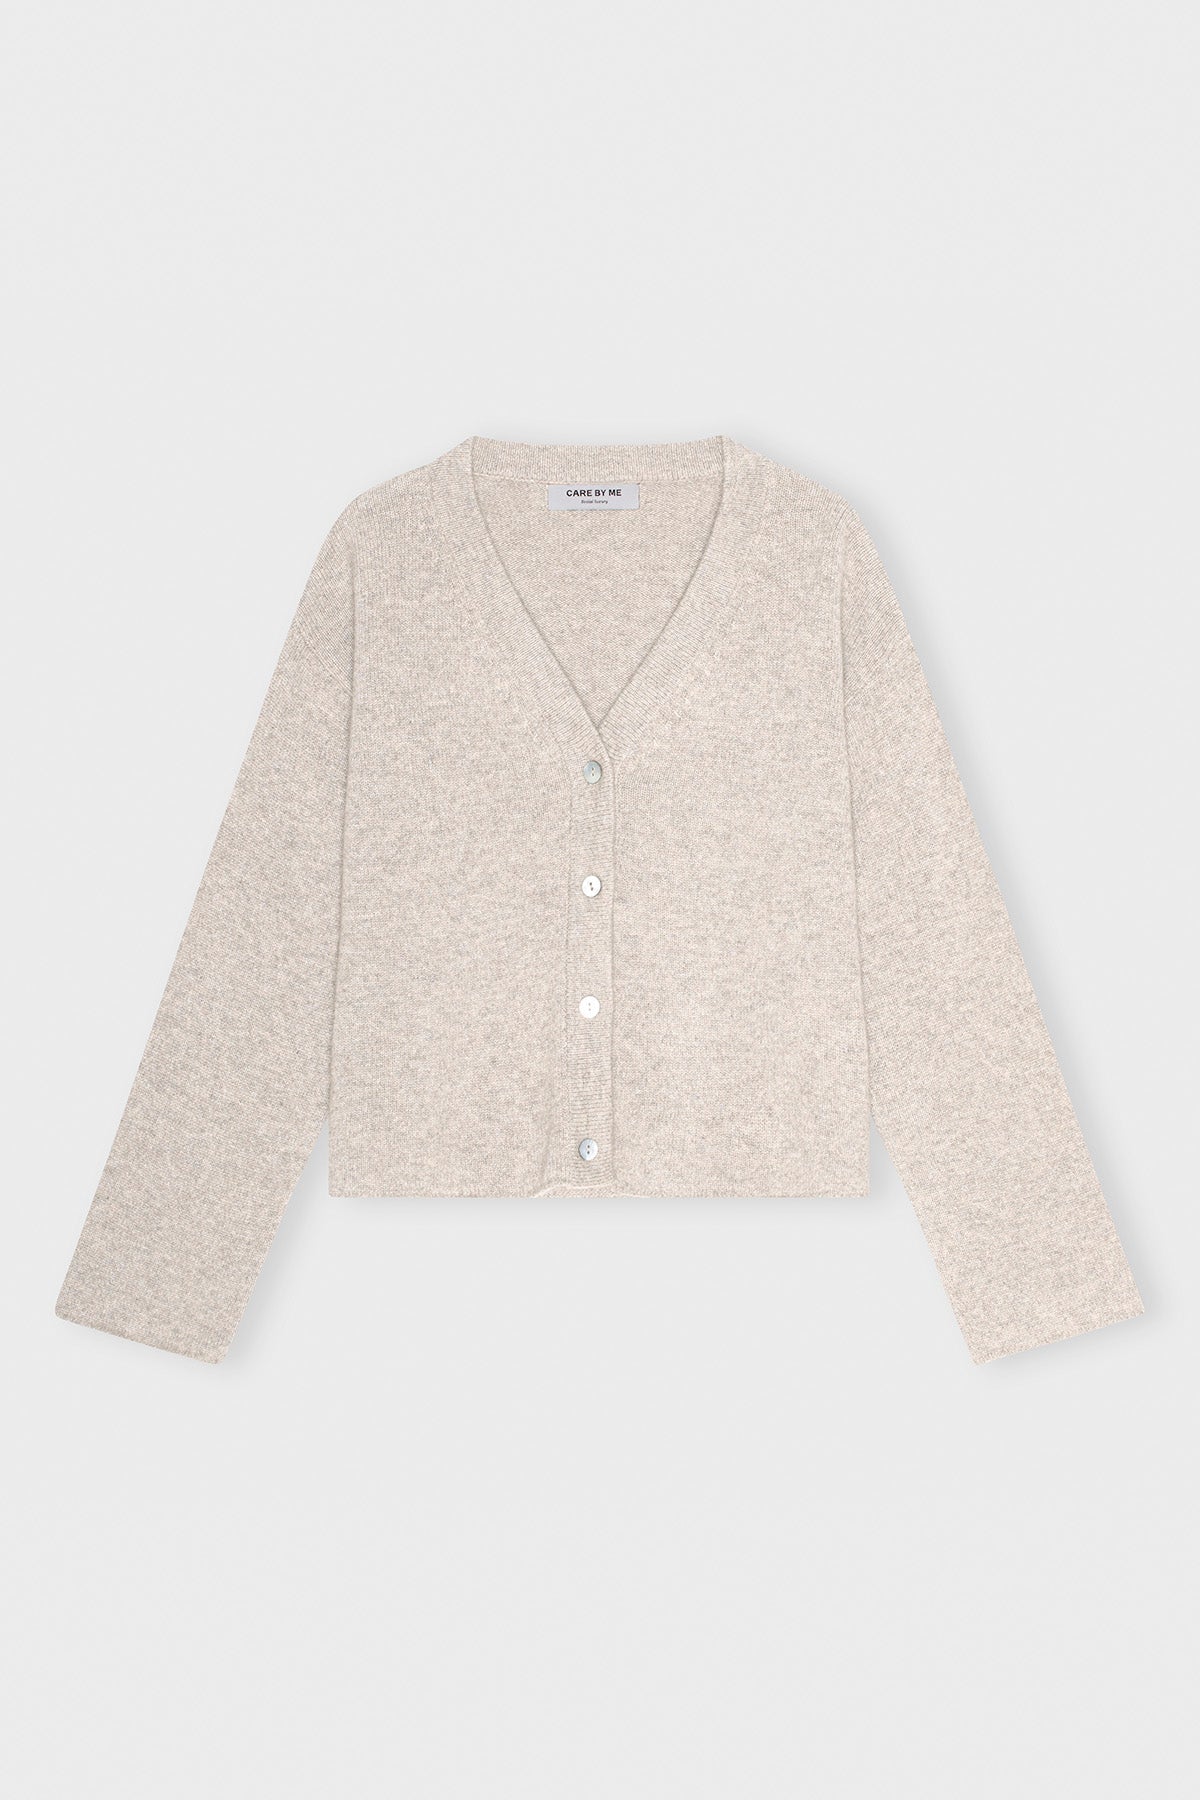 CARE BY ME 100% Cashmere Womens Madeline Cardigan